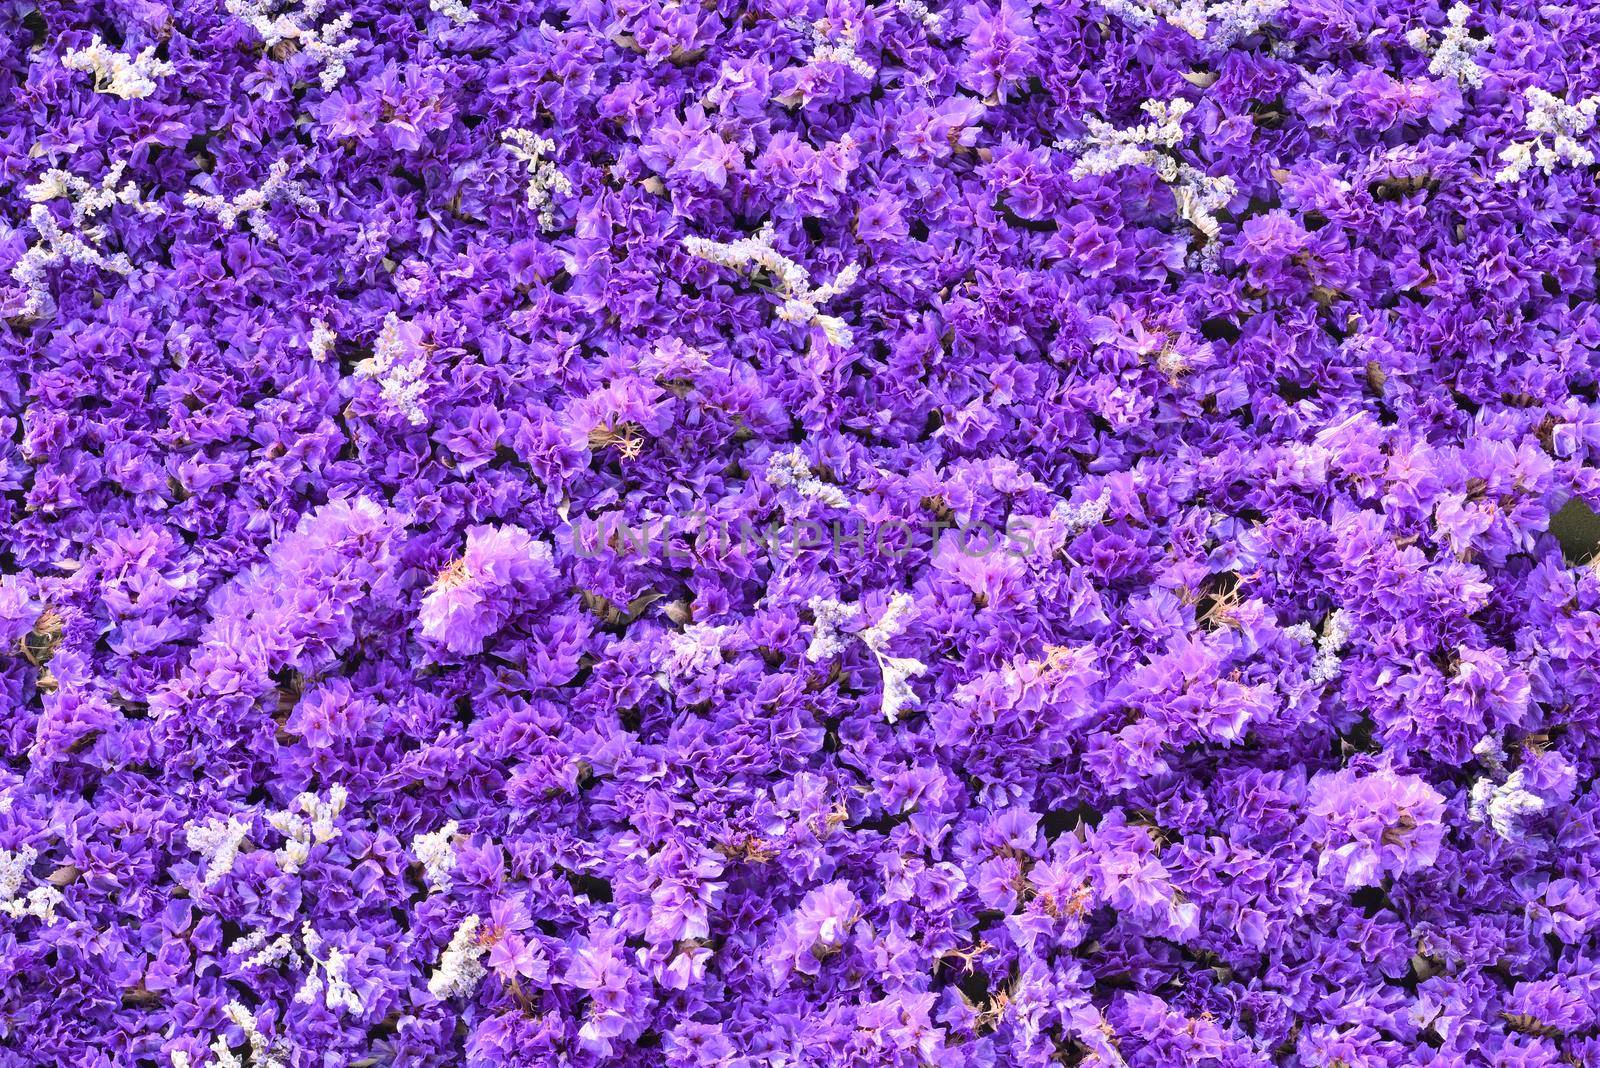 Blue and purple flowers of sea-lavender, statice, caspia, marsh-rosemary in thick carpet, by AlessandroZocc